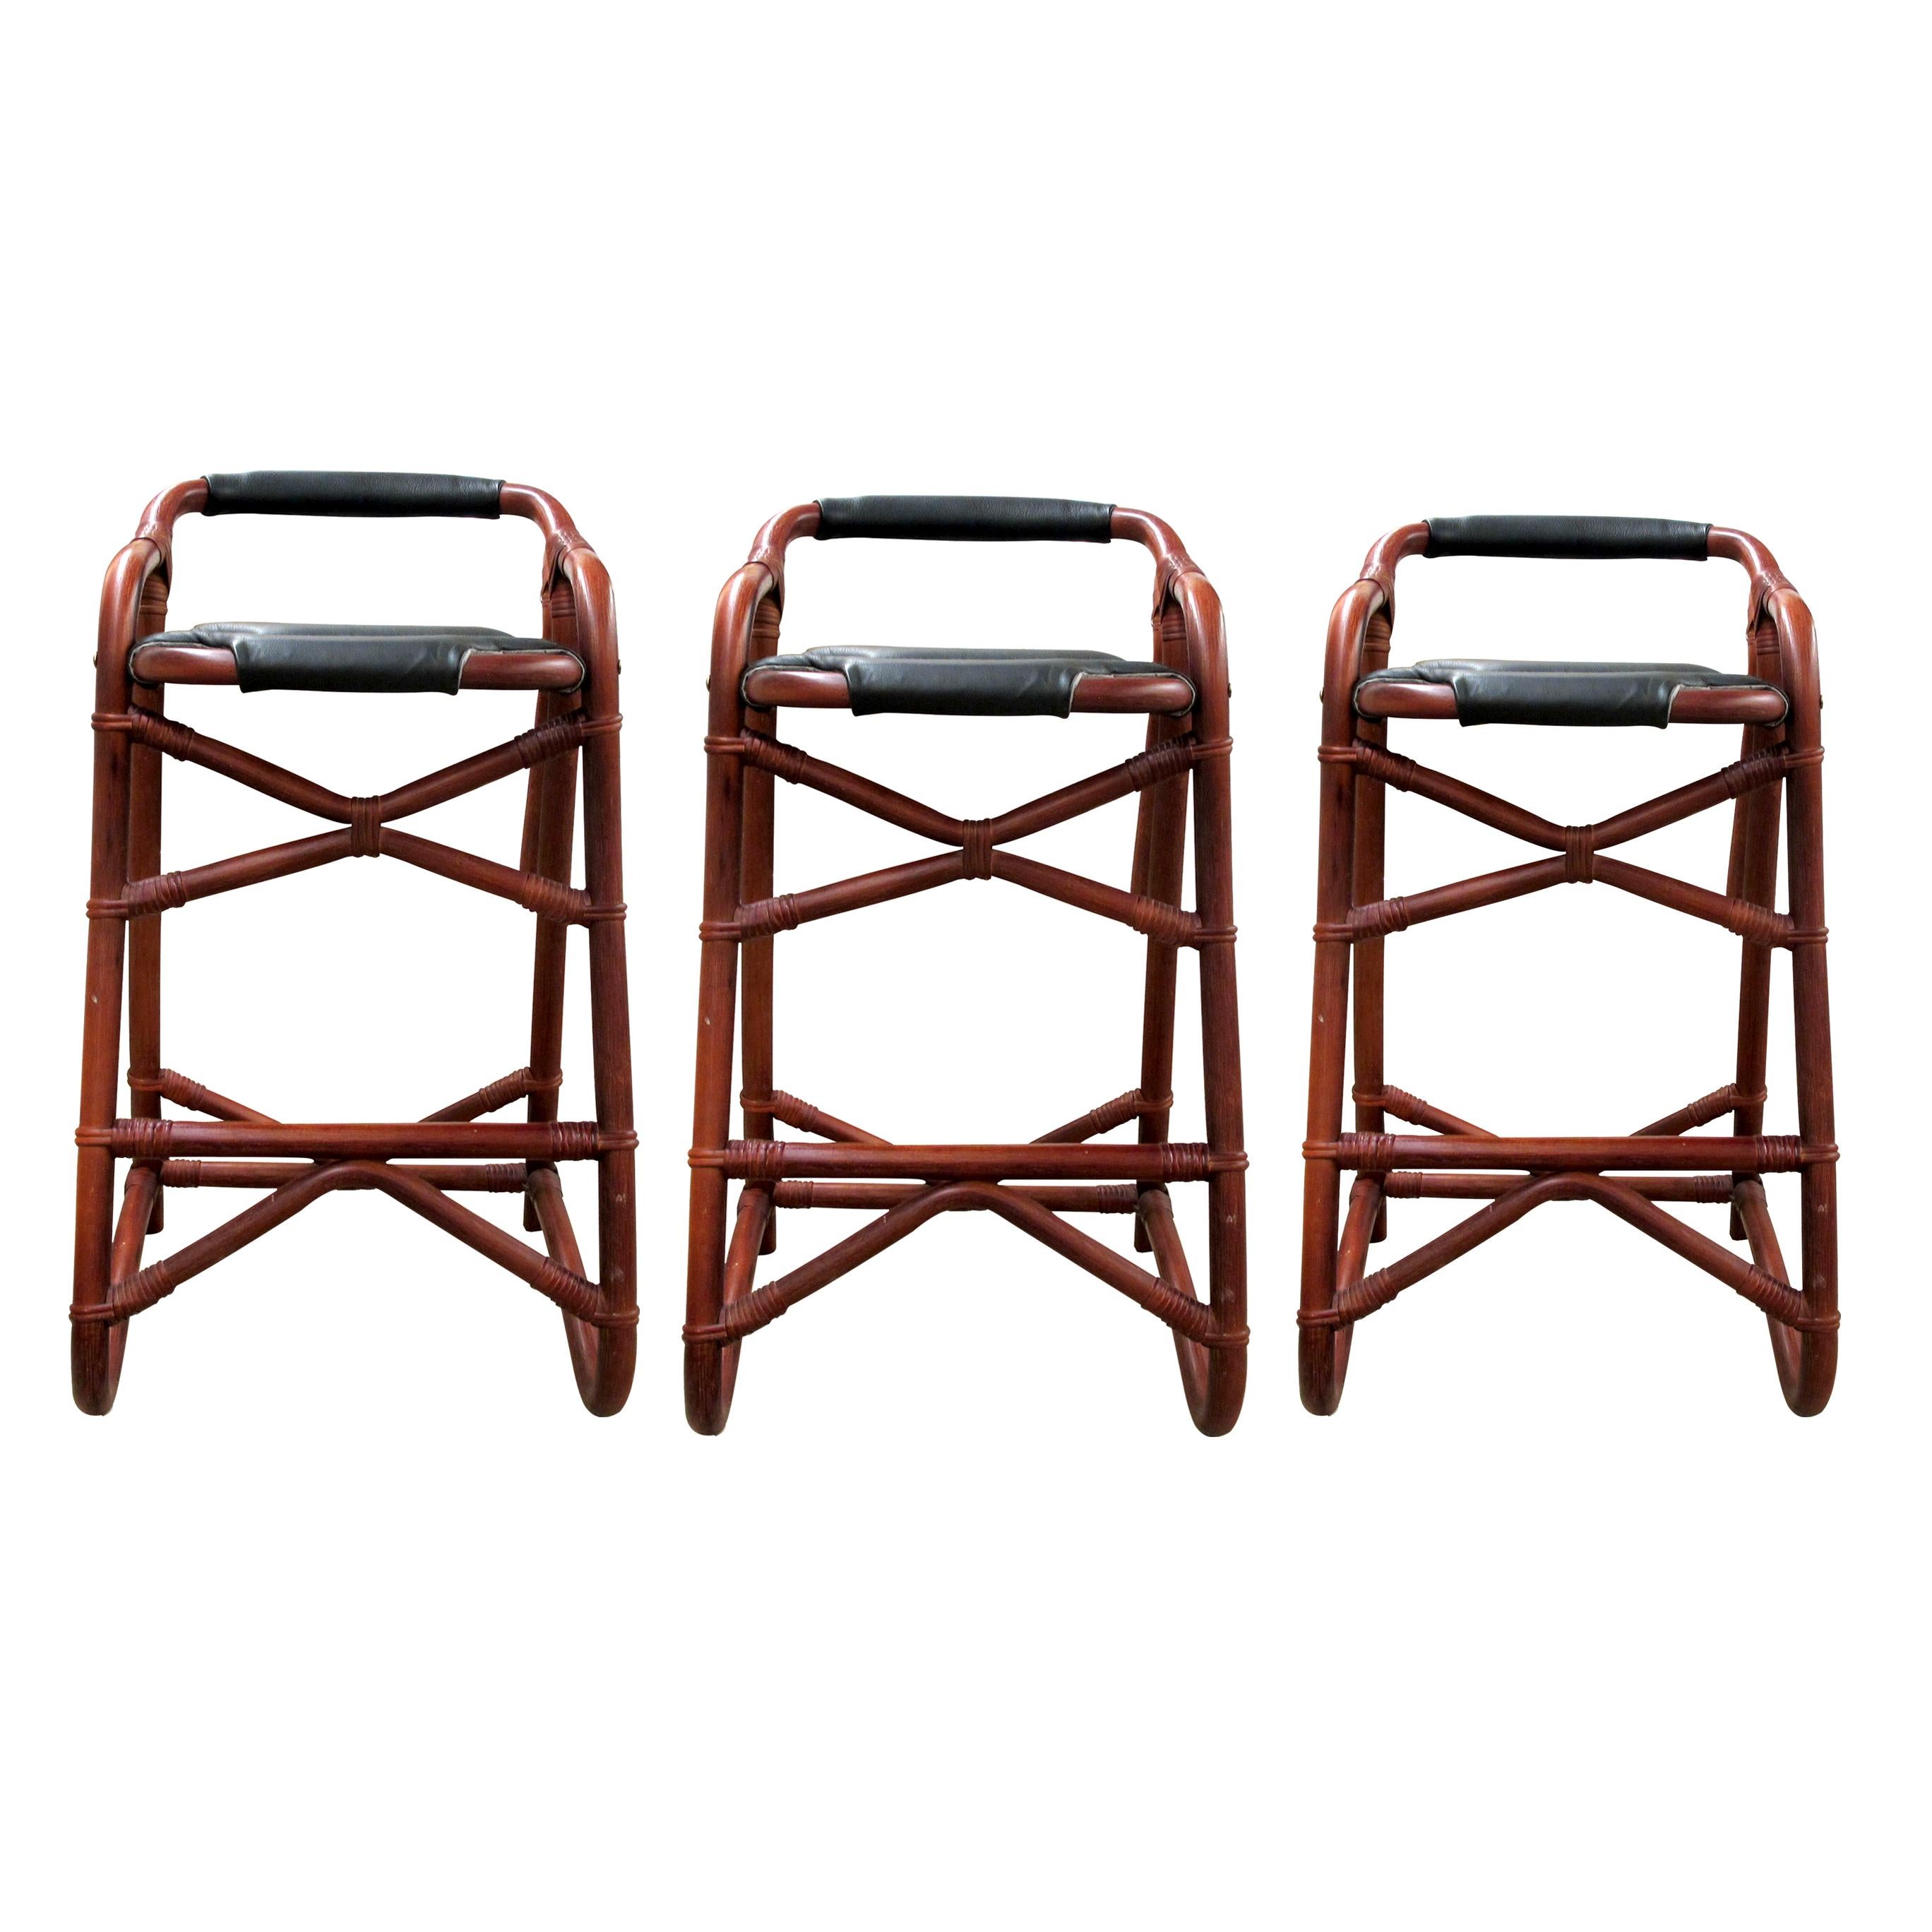 1970s set of three French Riviera bar stools with a sturdy bamboo frame. The stools are upholstered with black leather, the seat pads are padded for extra comfort. The bamboo frames are very well made, and the joinery is made with ratan.   

Size: